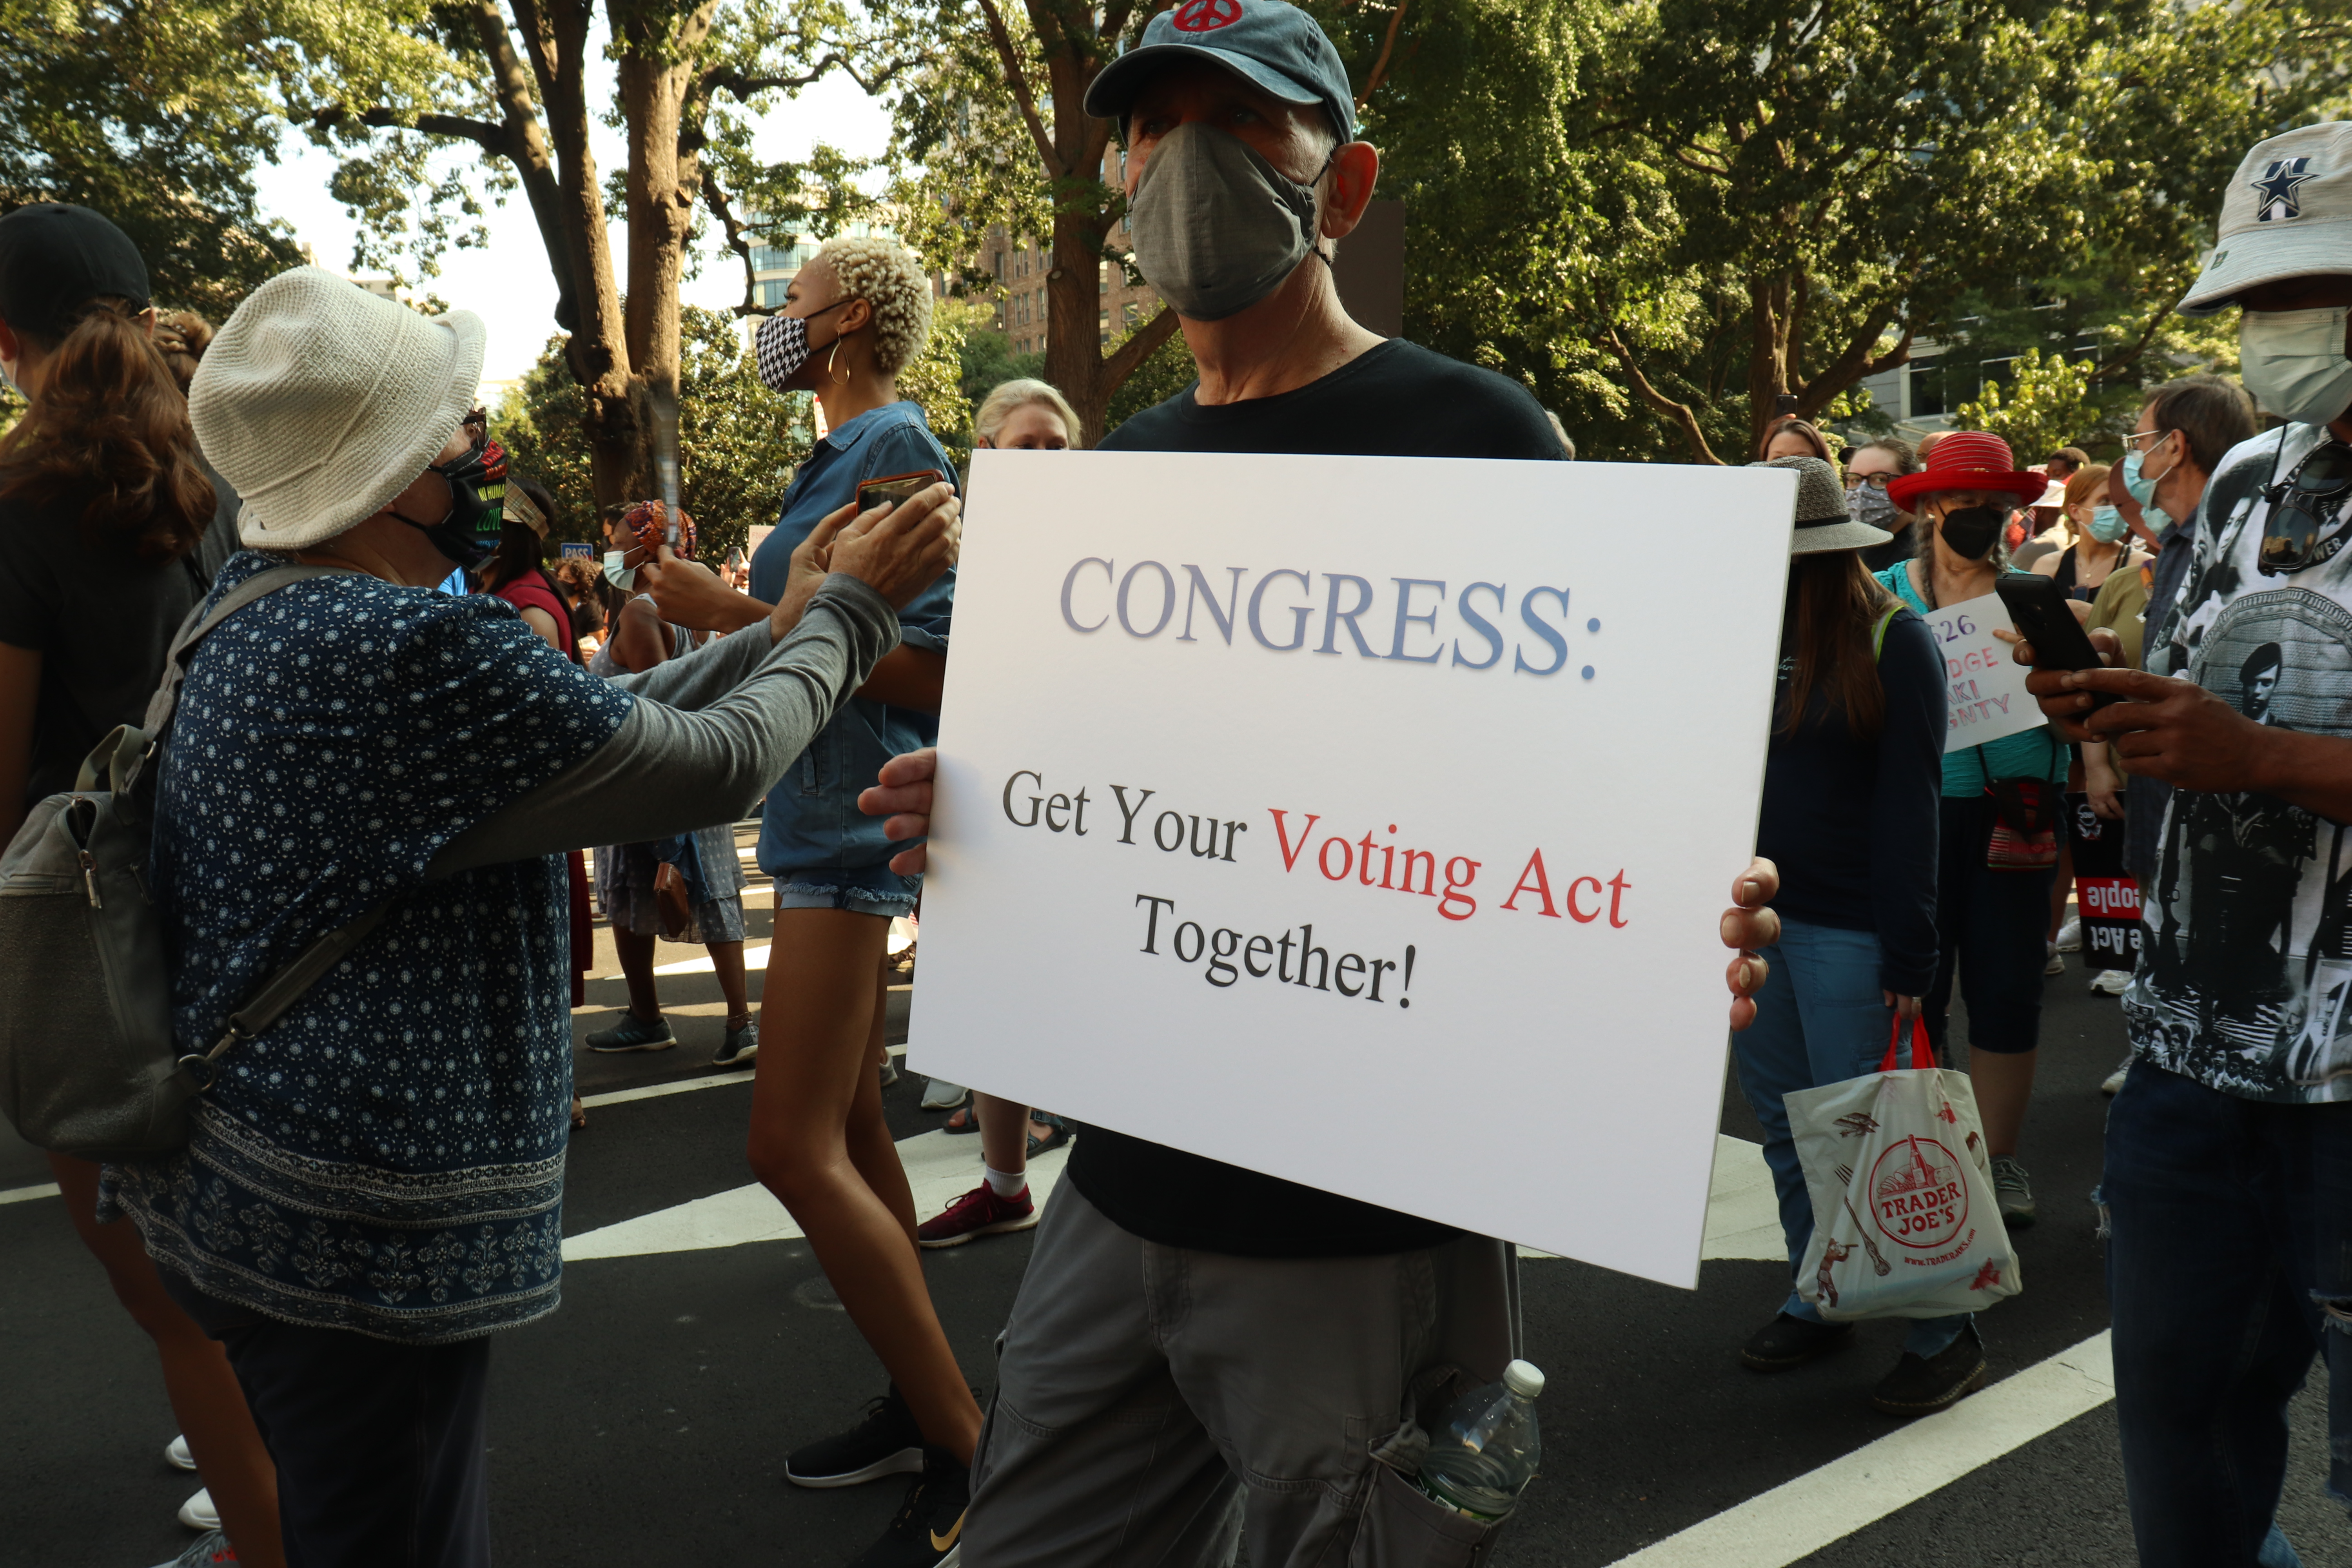 Securing the Right to Vote: Marchers Take to the Nation’s Capital to Demand Change